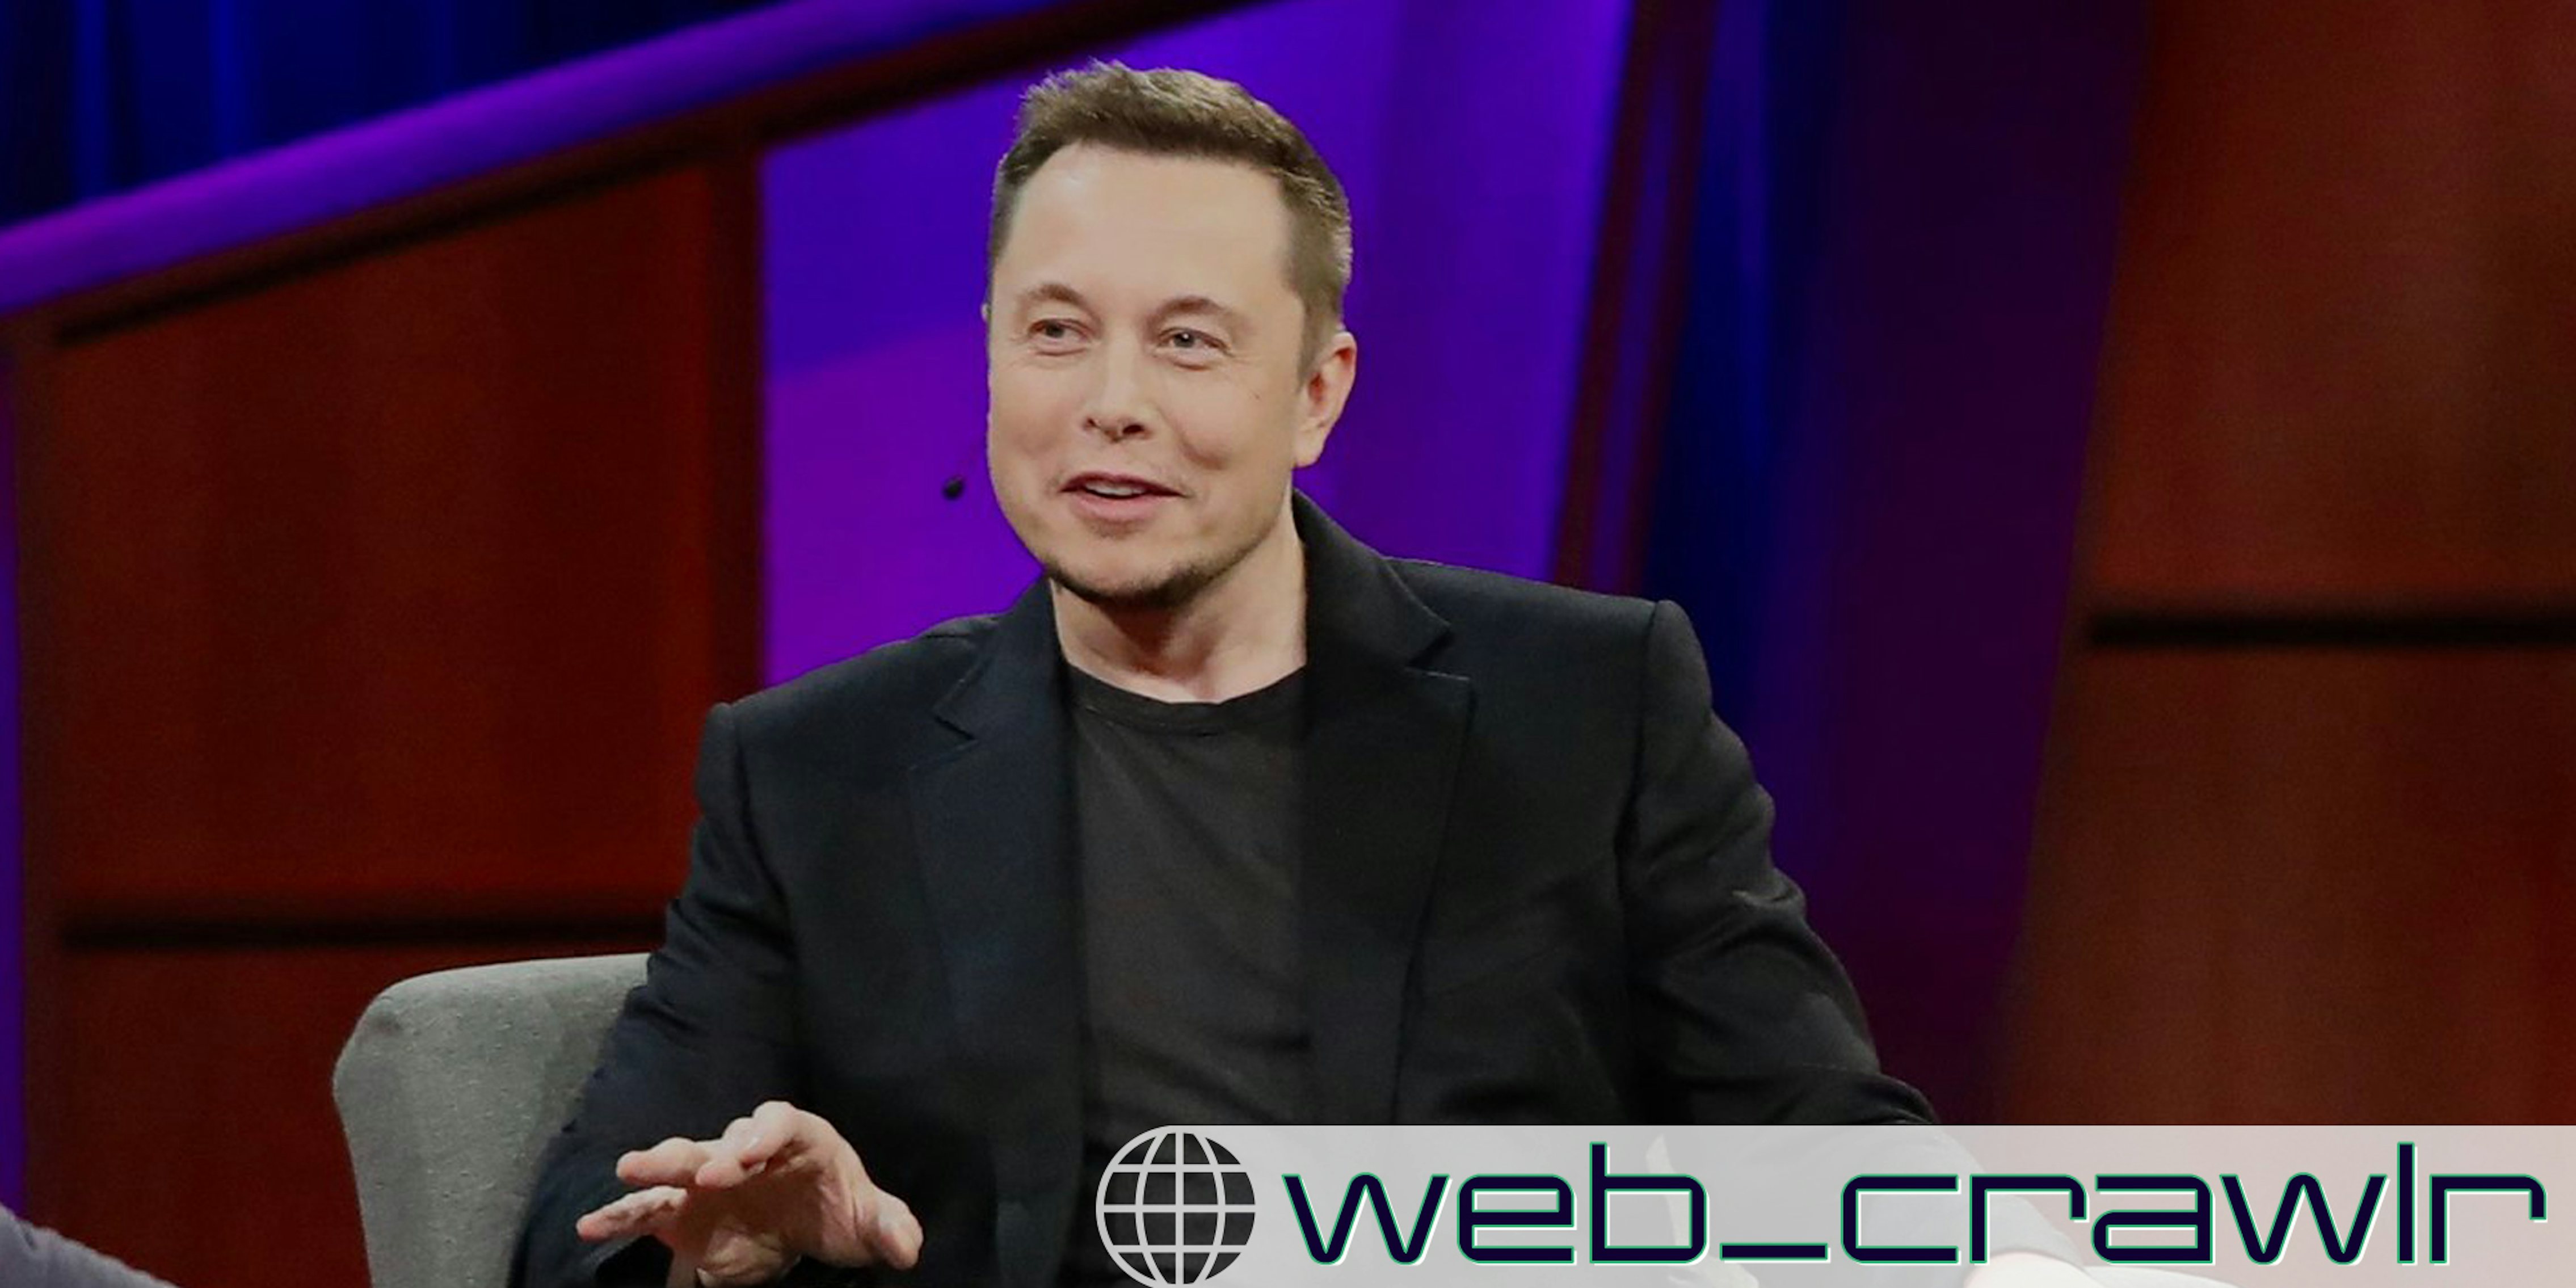 Elon Musk speaking during an interview. The Daily Dot newsletter web_crawlr logo is in the bottom right corner.